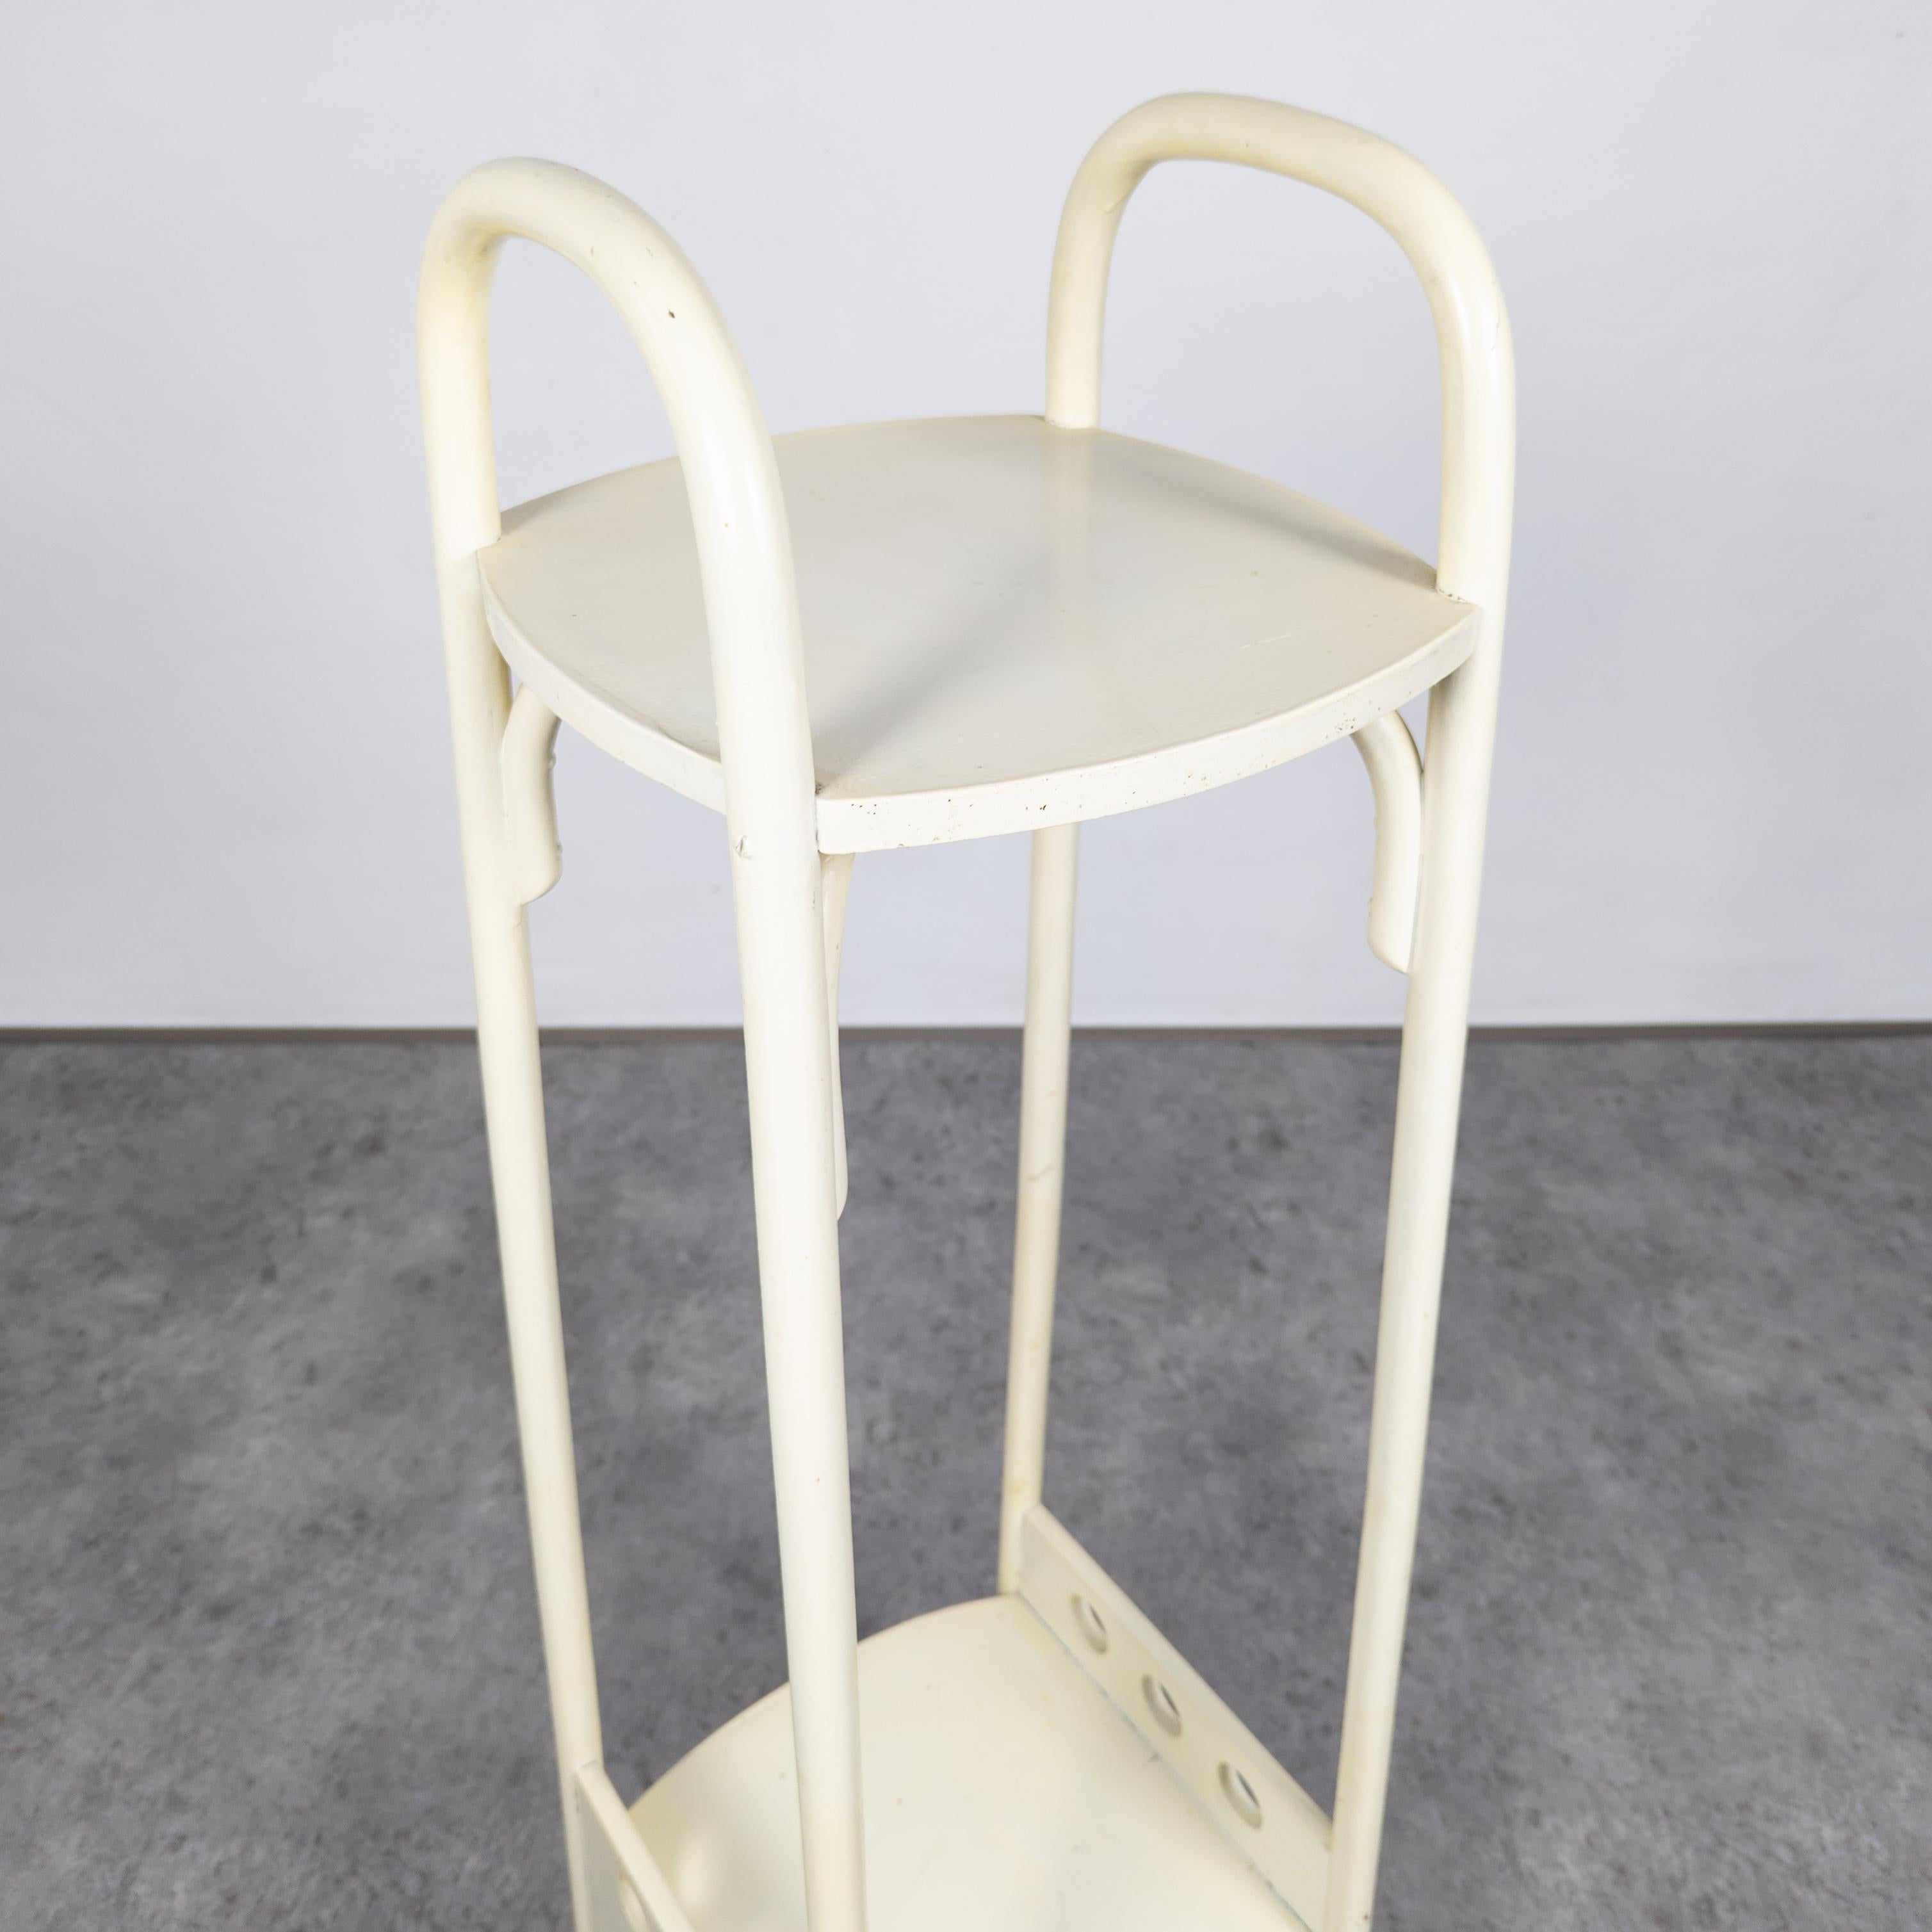 Austrian Rare Thonet Nr. 21 plant stand by Josef Hoffmann For Sale